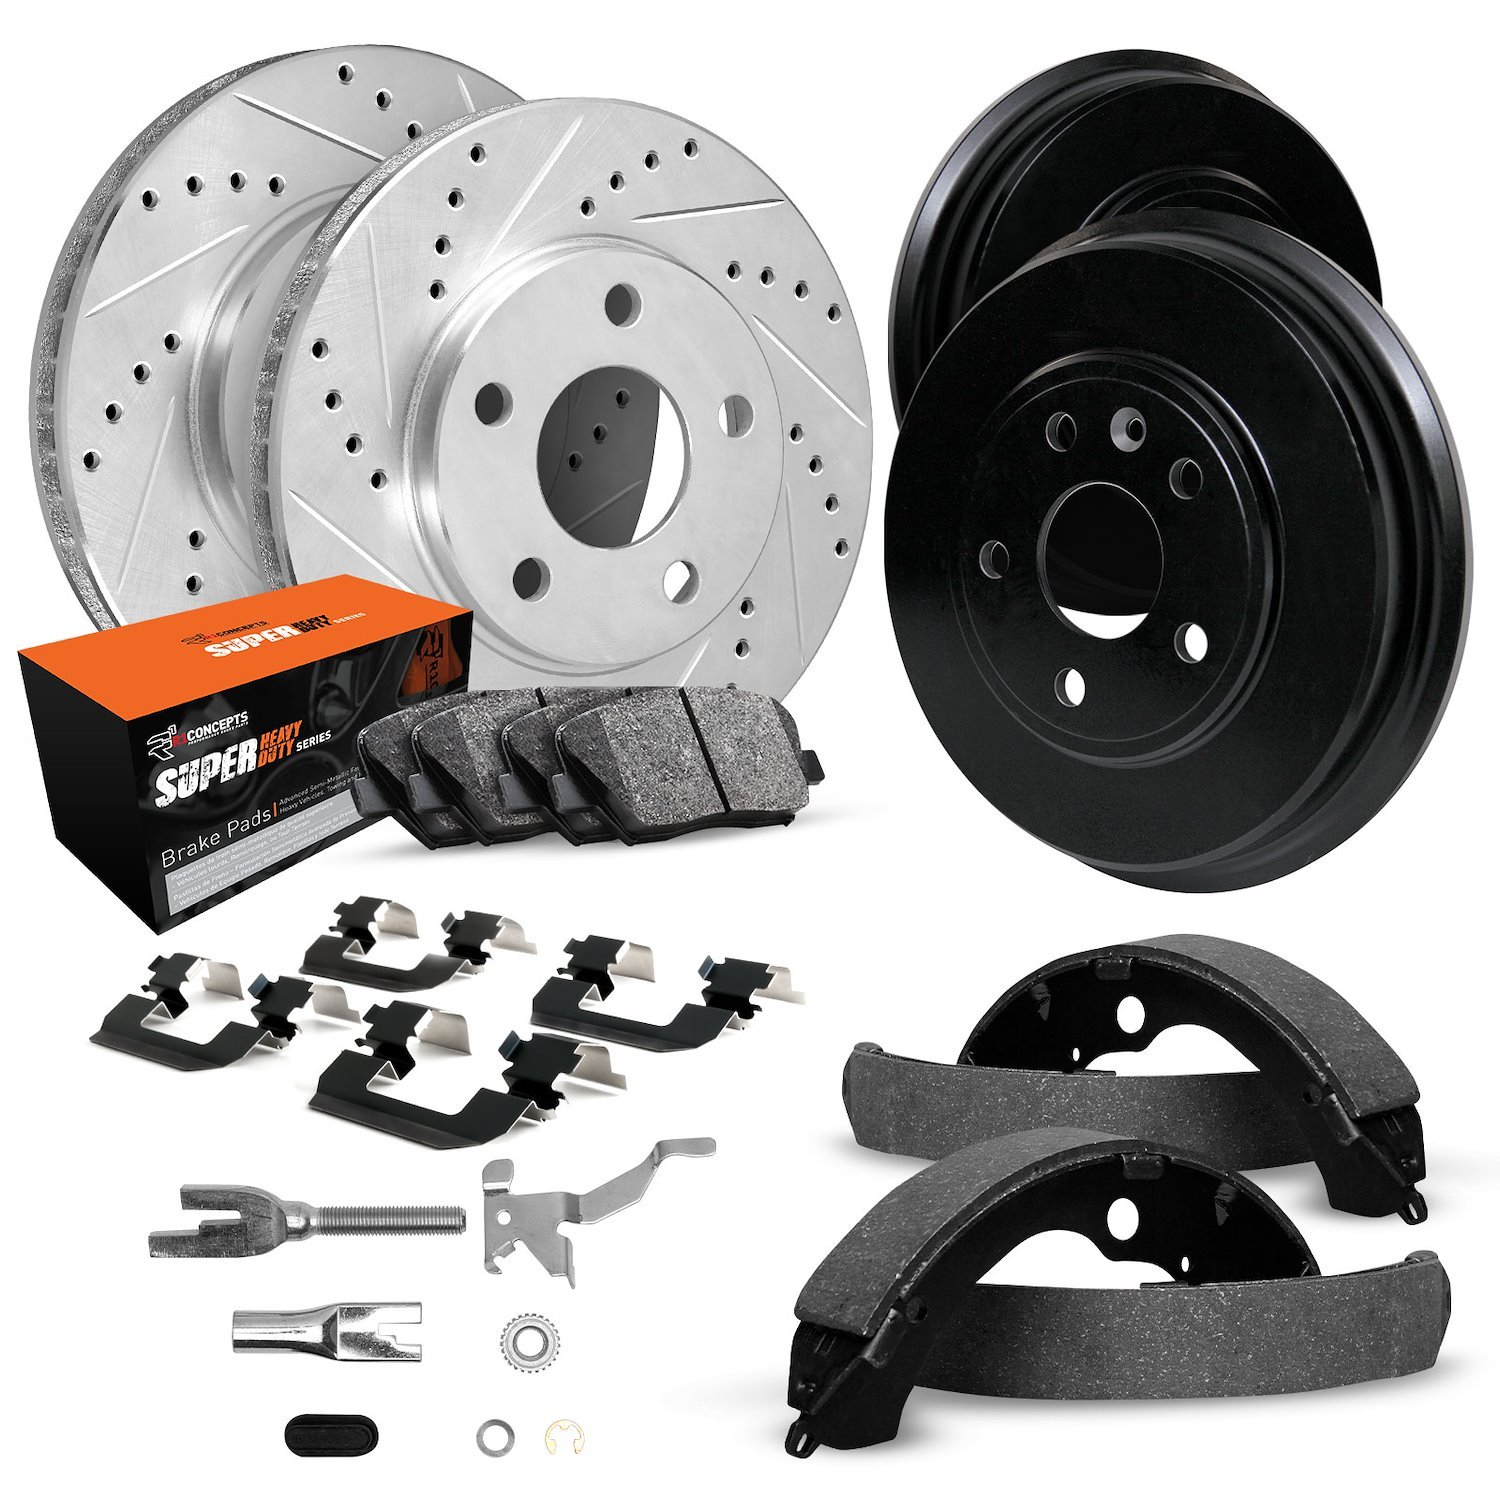 E-Line Drilled/Slotted Silver Rotor & Drum Set w/Super-Duty Pads, Shoes/Hardware/Adjusters, 1999-1999 Mopar